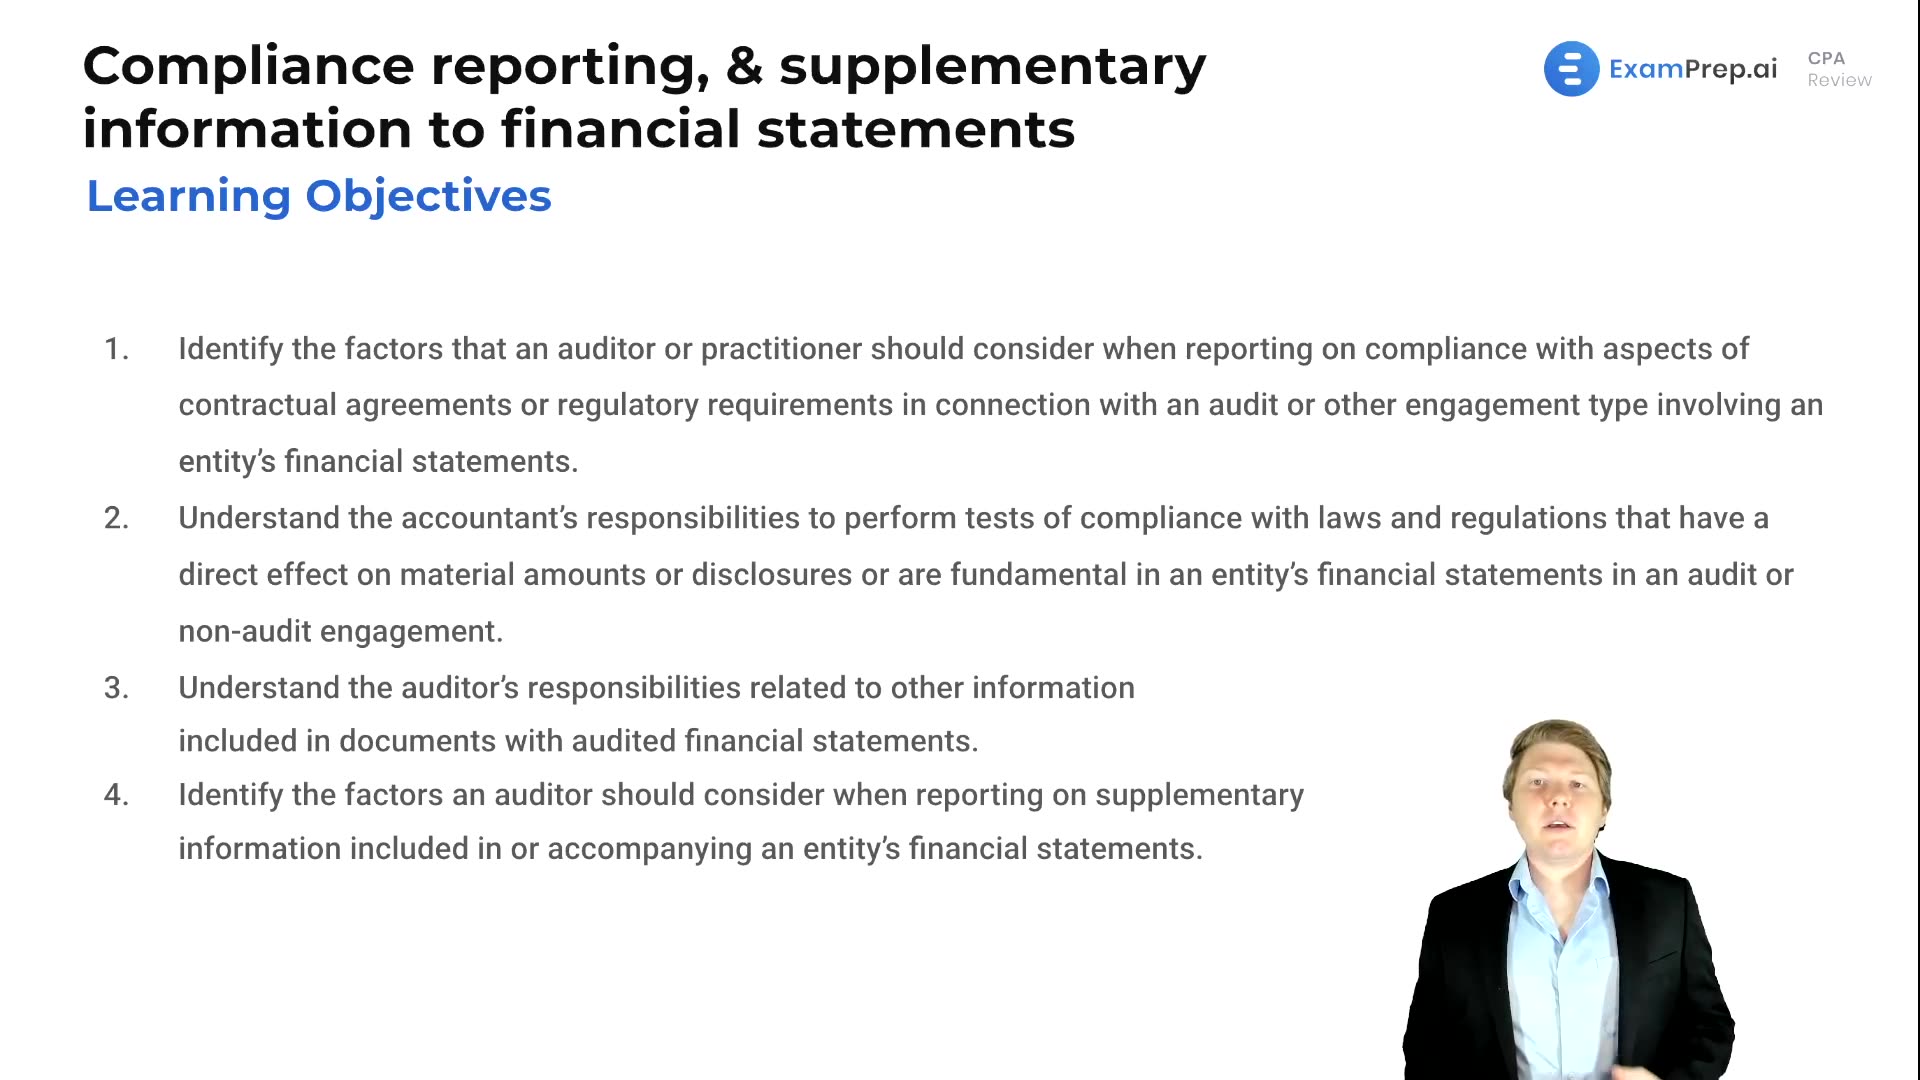 Compliance Reporting, & Supplementary Information to Financial Statements Objectives lesson thumbnail